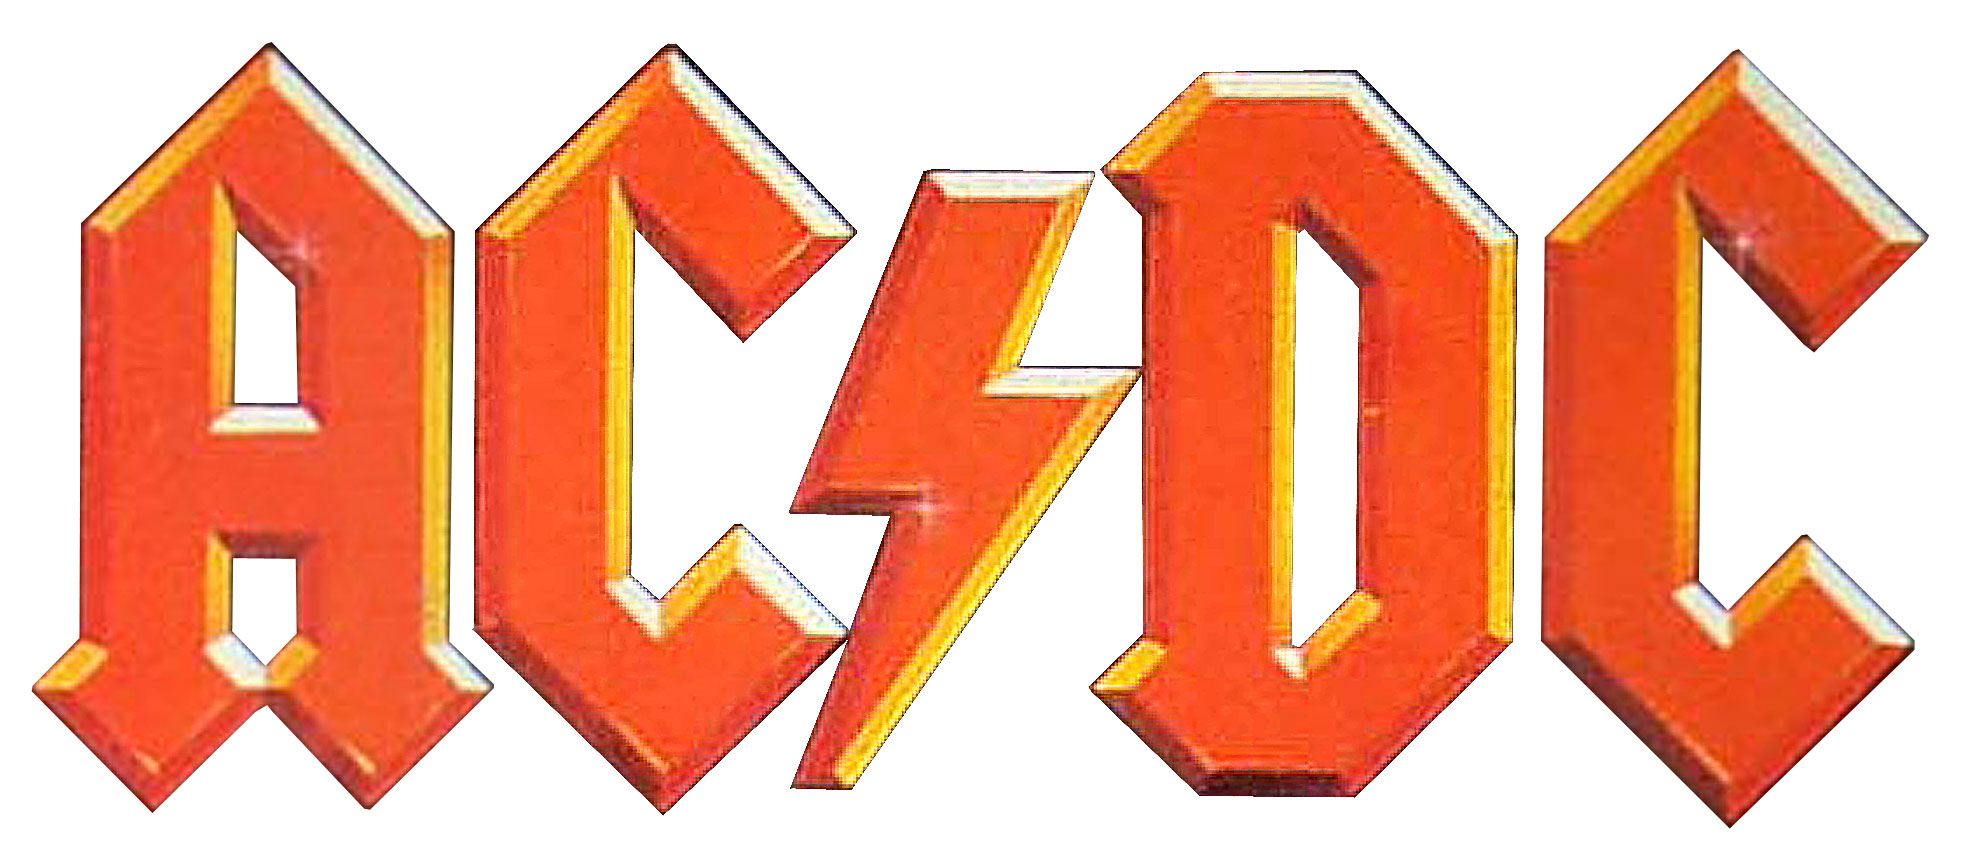 Ac Dc Logos And Lettering What S That Font